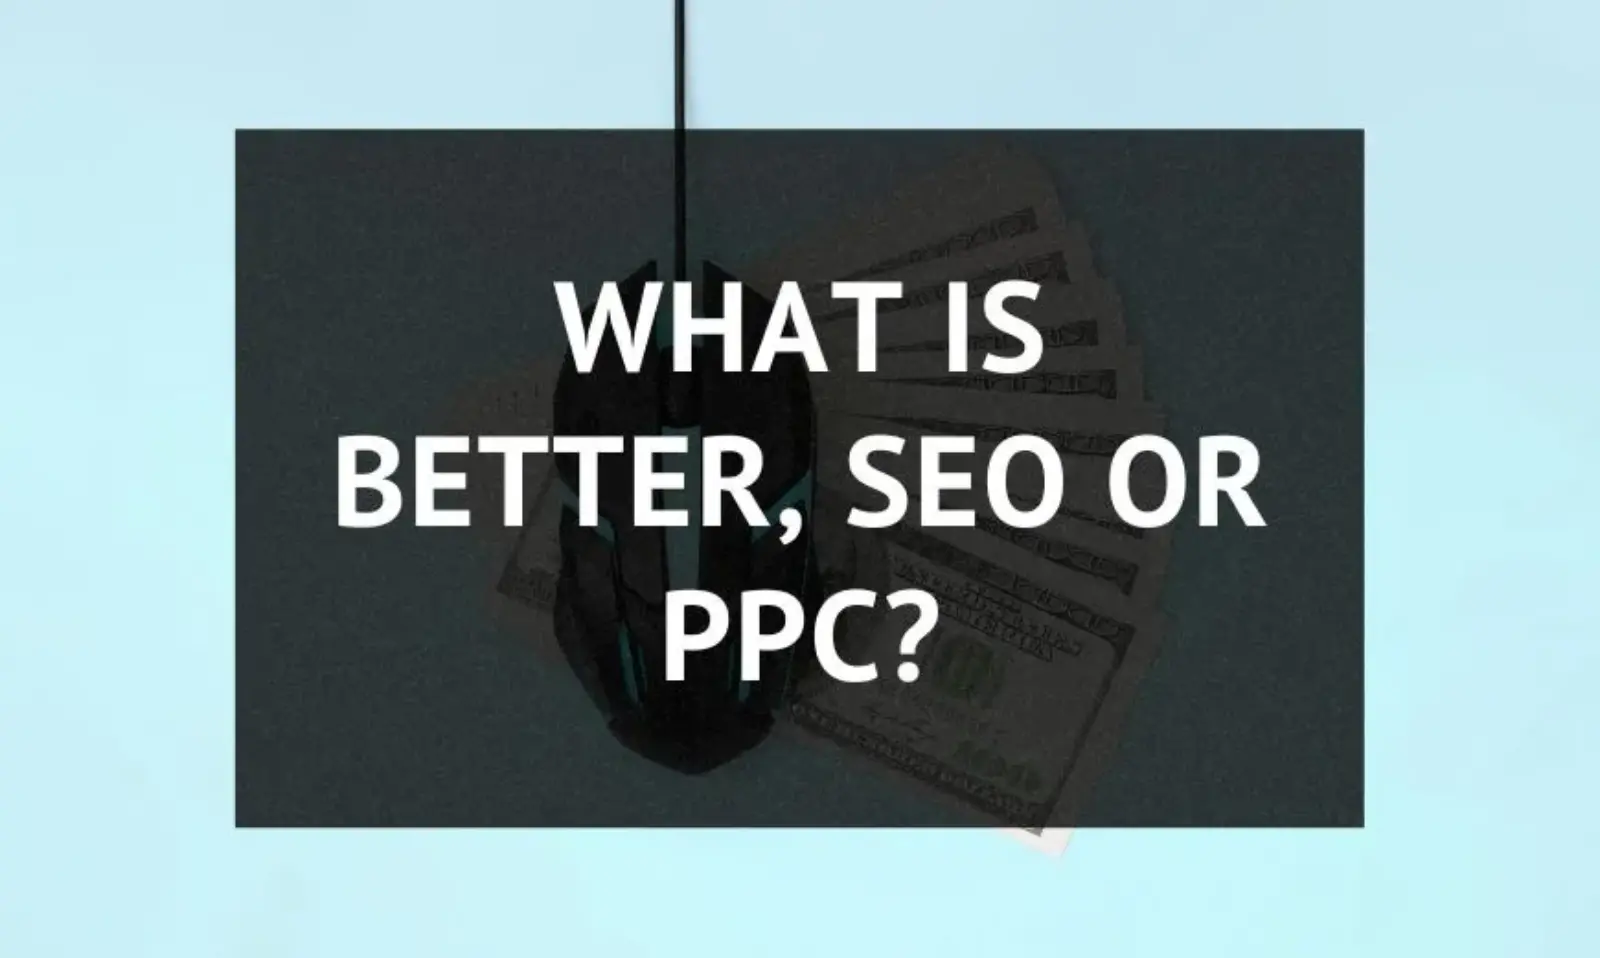 What is better, SEO or PPC